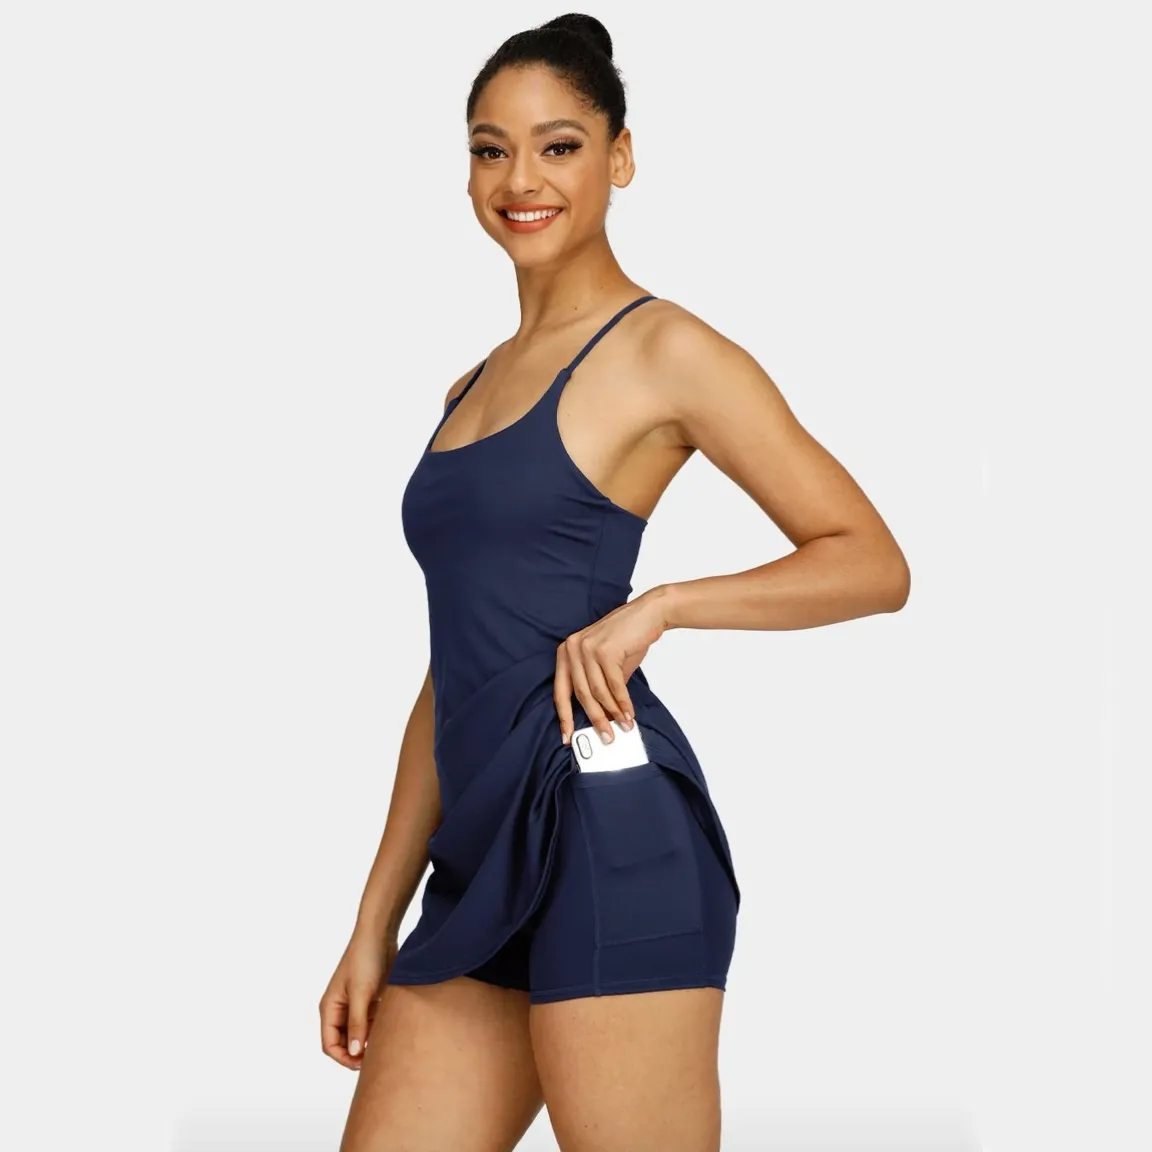 Halara exercise dress review: Is it the best Outdoor Voices dupe? - Reviewed